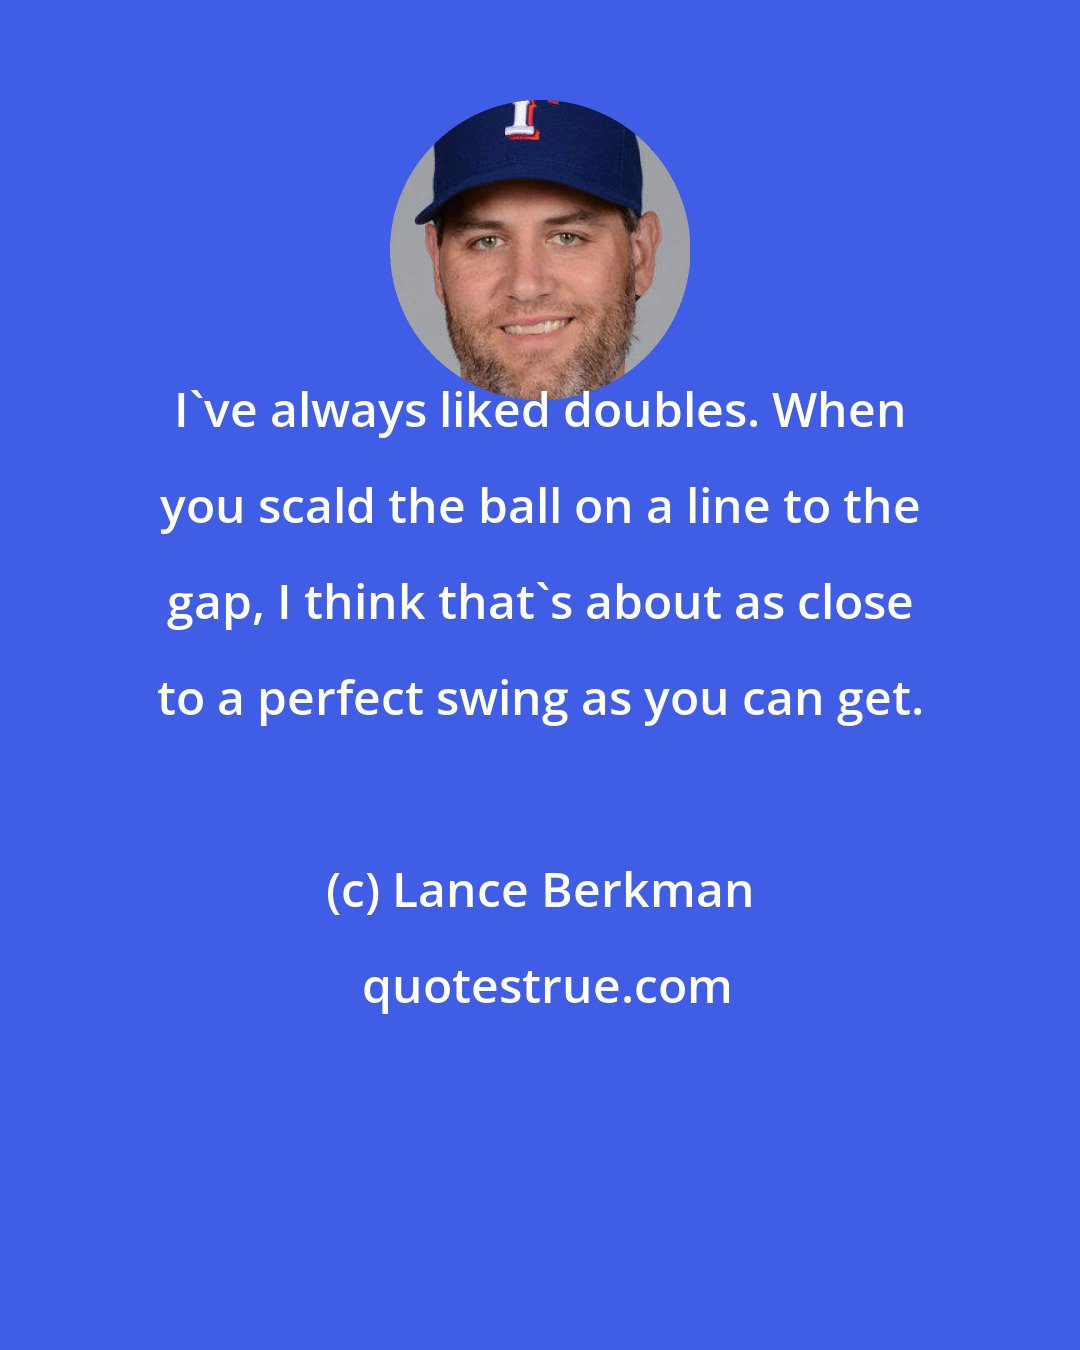 Lance Berkman: I've always liked doubles. When you scald the ball on a line to the gap, I think that's about as close to a perfect swing as you can get.